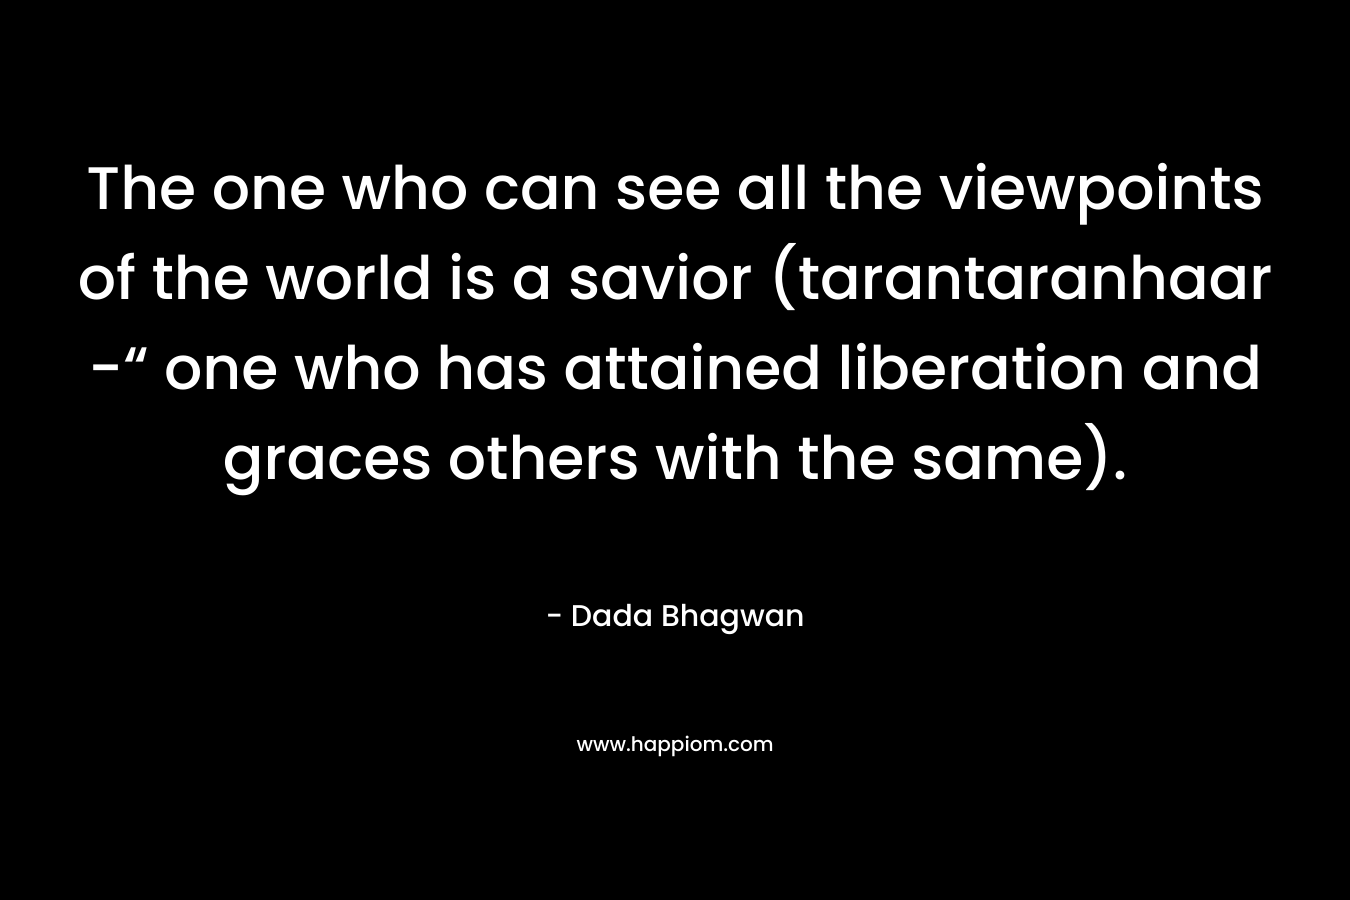 The one who can see all the viewpoints of the world is a savior (tarantaranhaar -“ one who has attained liberation and graces others with the same). – Dada Bhagwan